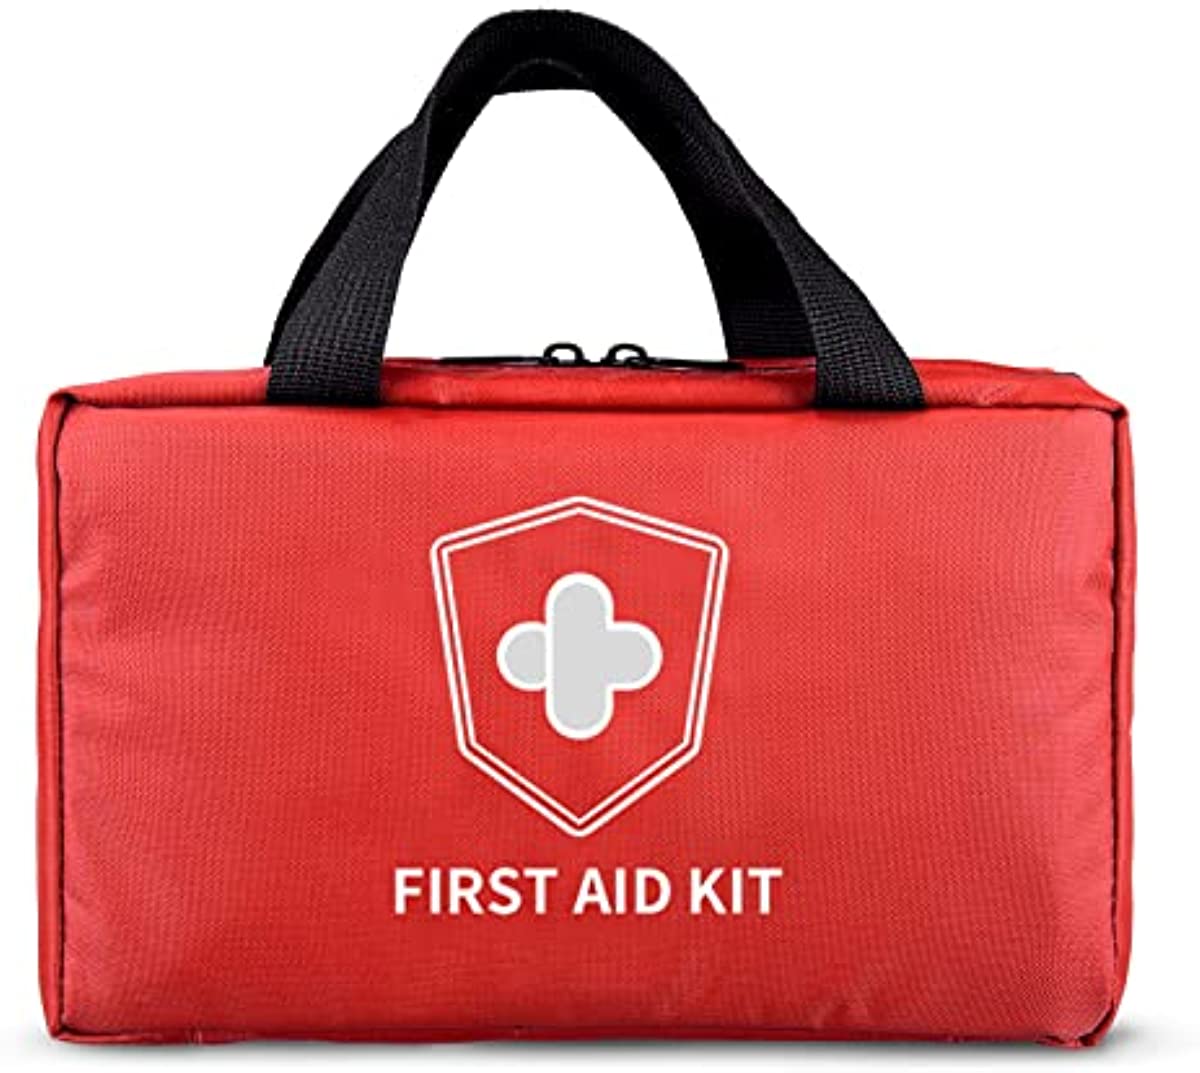 Kitgo Small First Aid Kit with 192 Pcs Essential Medical Supplies Emergency for Workplace Home Sports Wilderness Survival Driving Traveling Boating Hiking